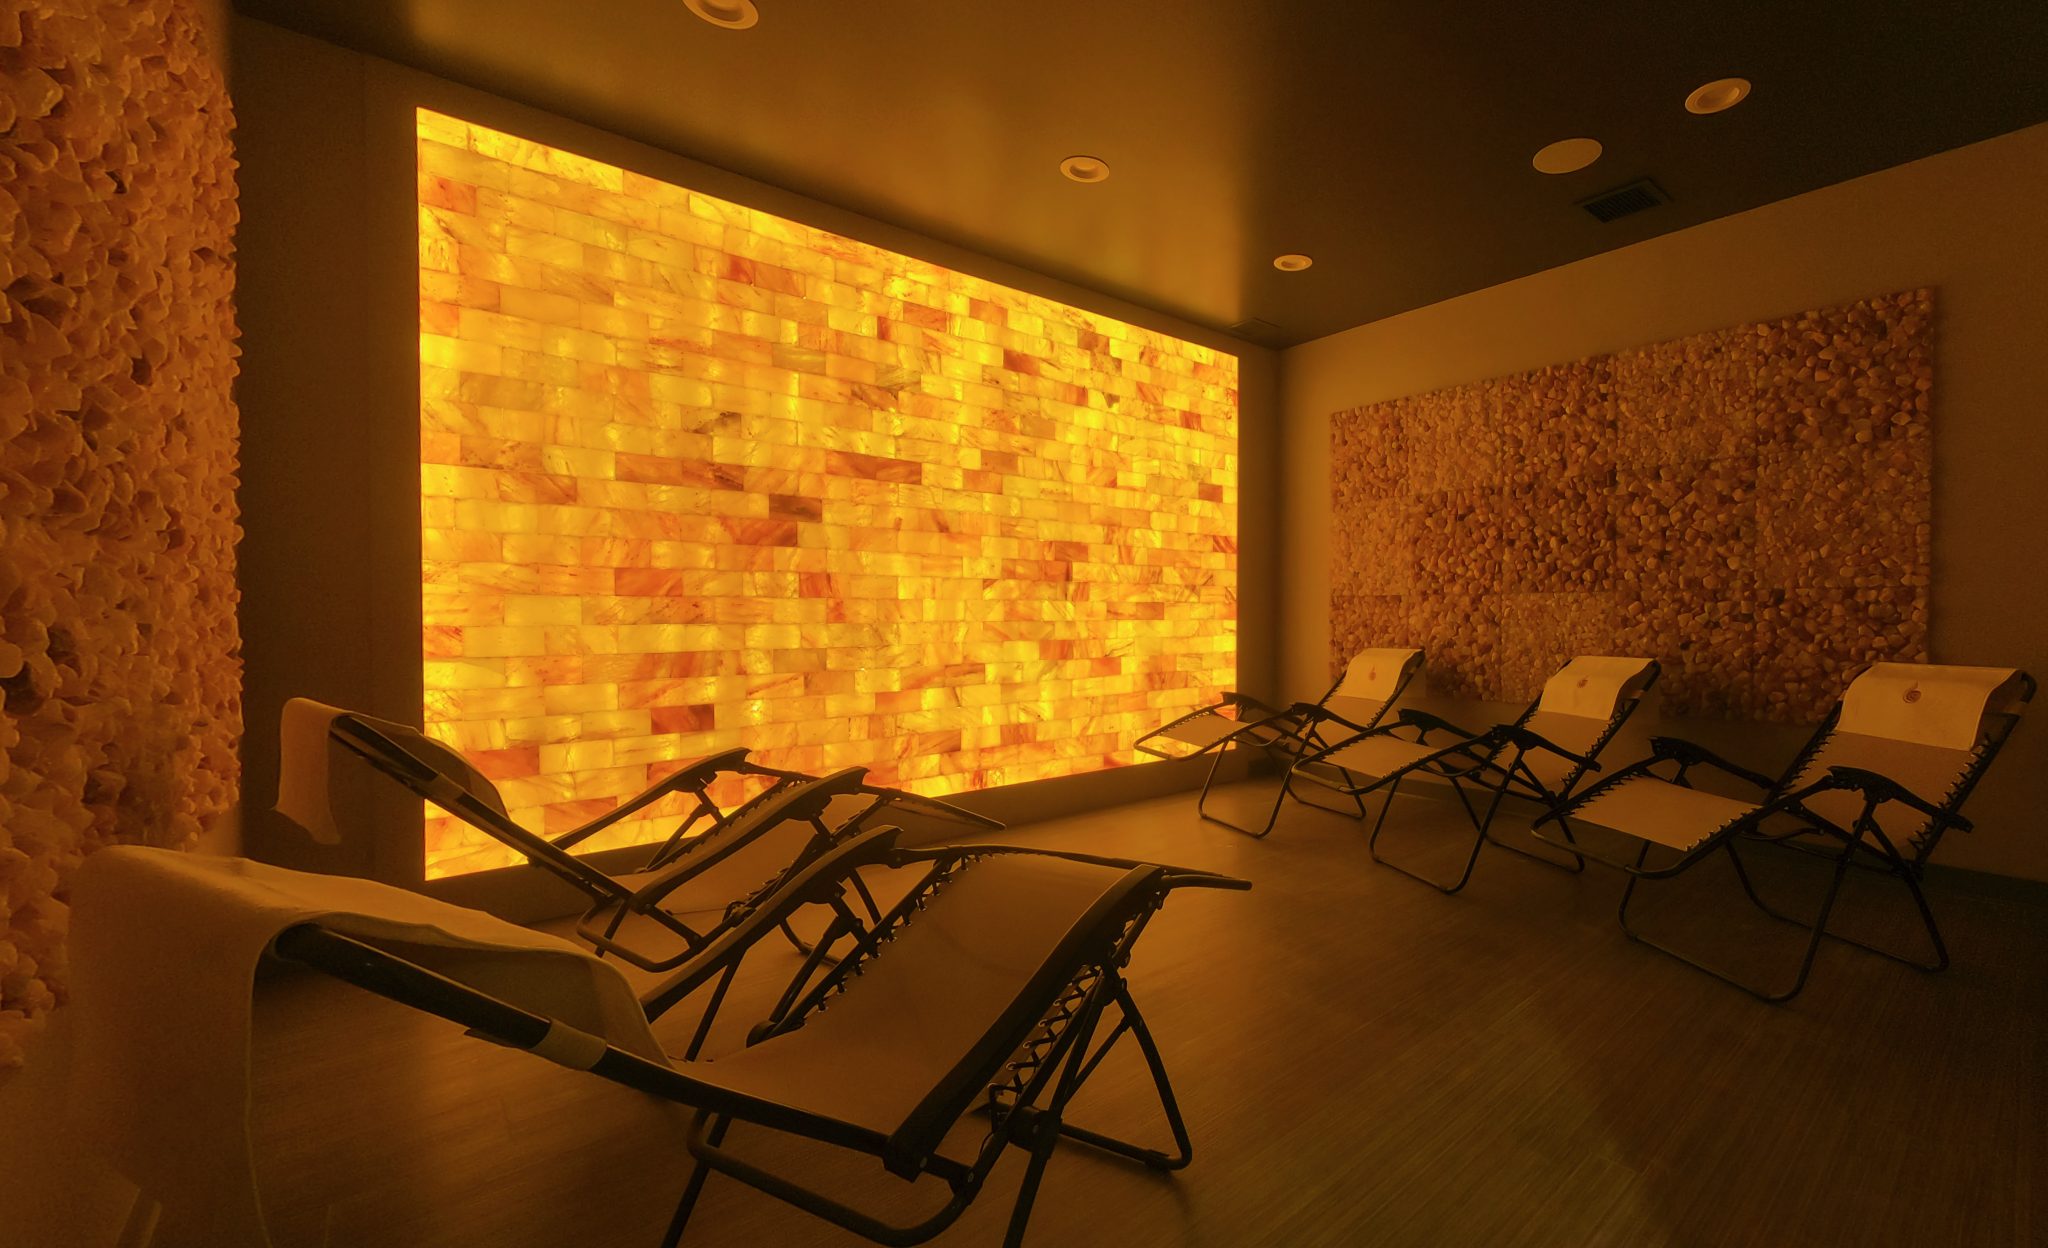 Five Reclined Chairs In A Salt Vault Surrounded By A Led Backlit Salt Brick Wall And Two Salt Panels.